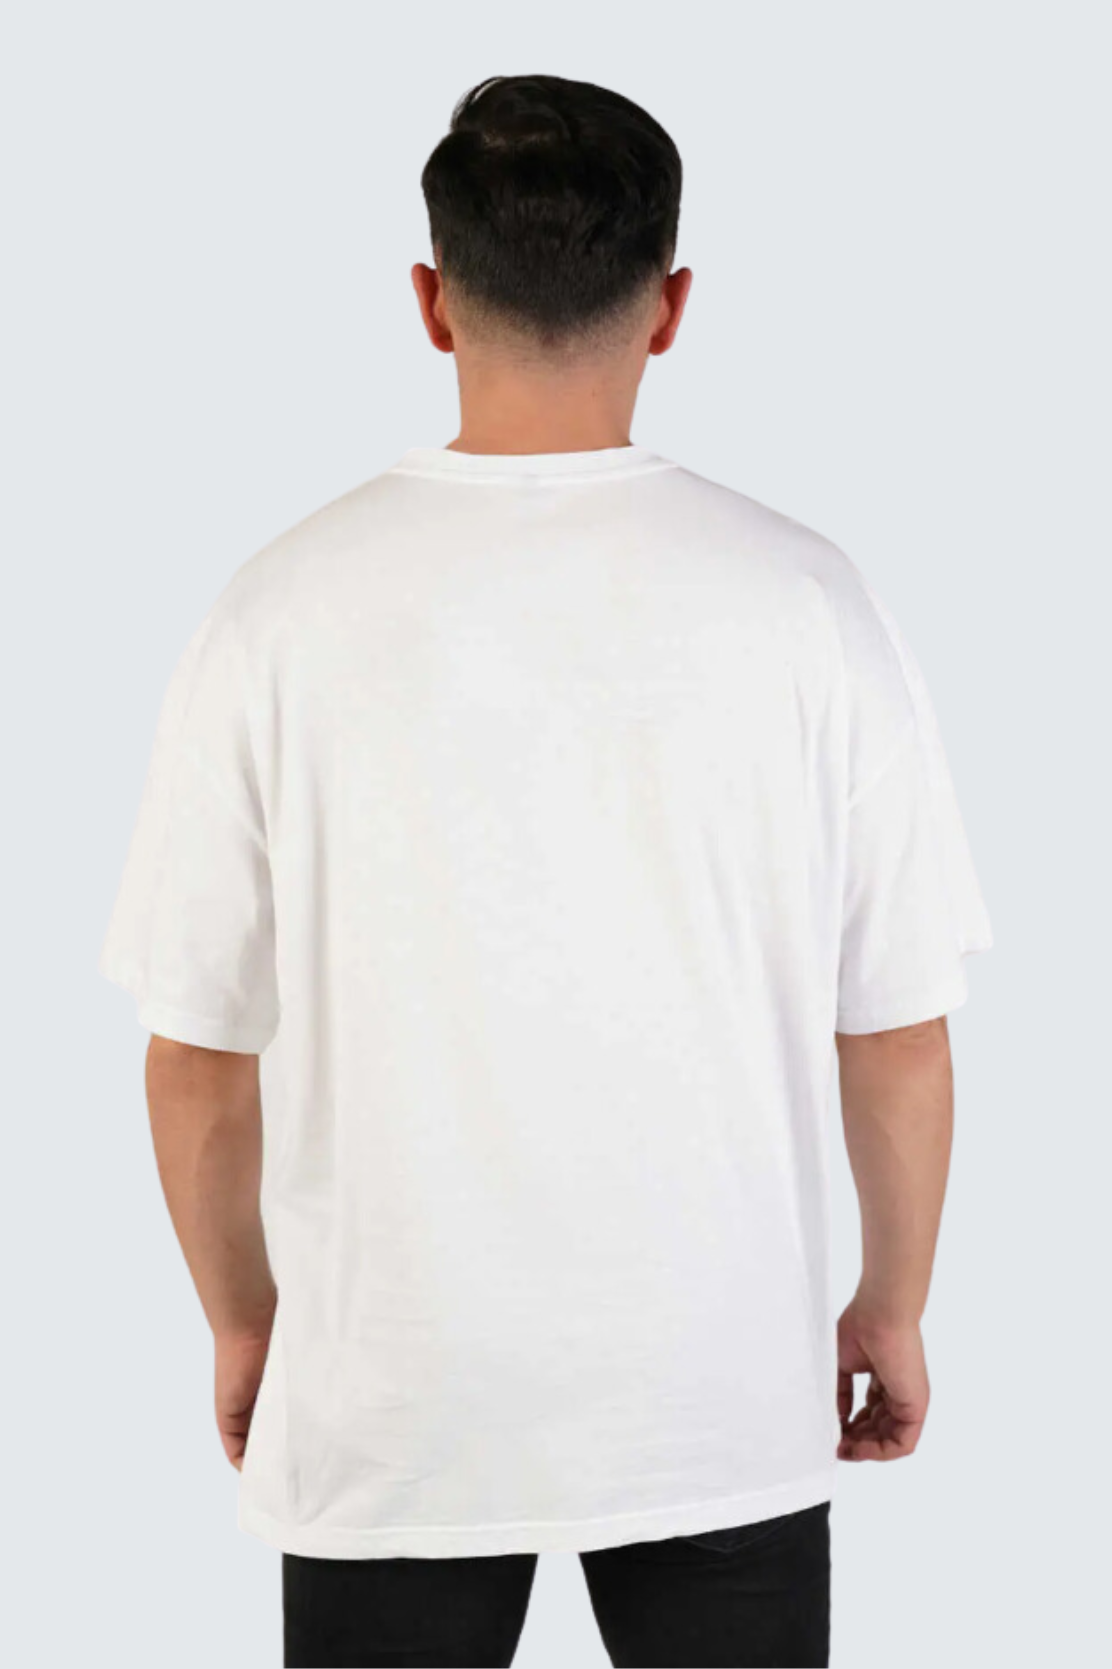 Keep Life Simple oversized pure cotton t-shirt